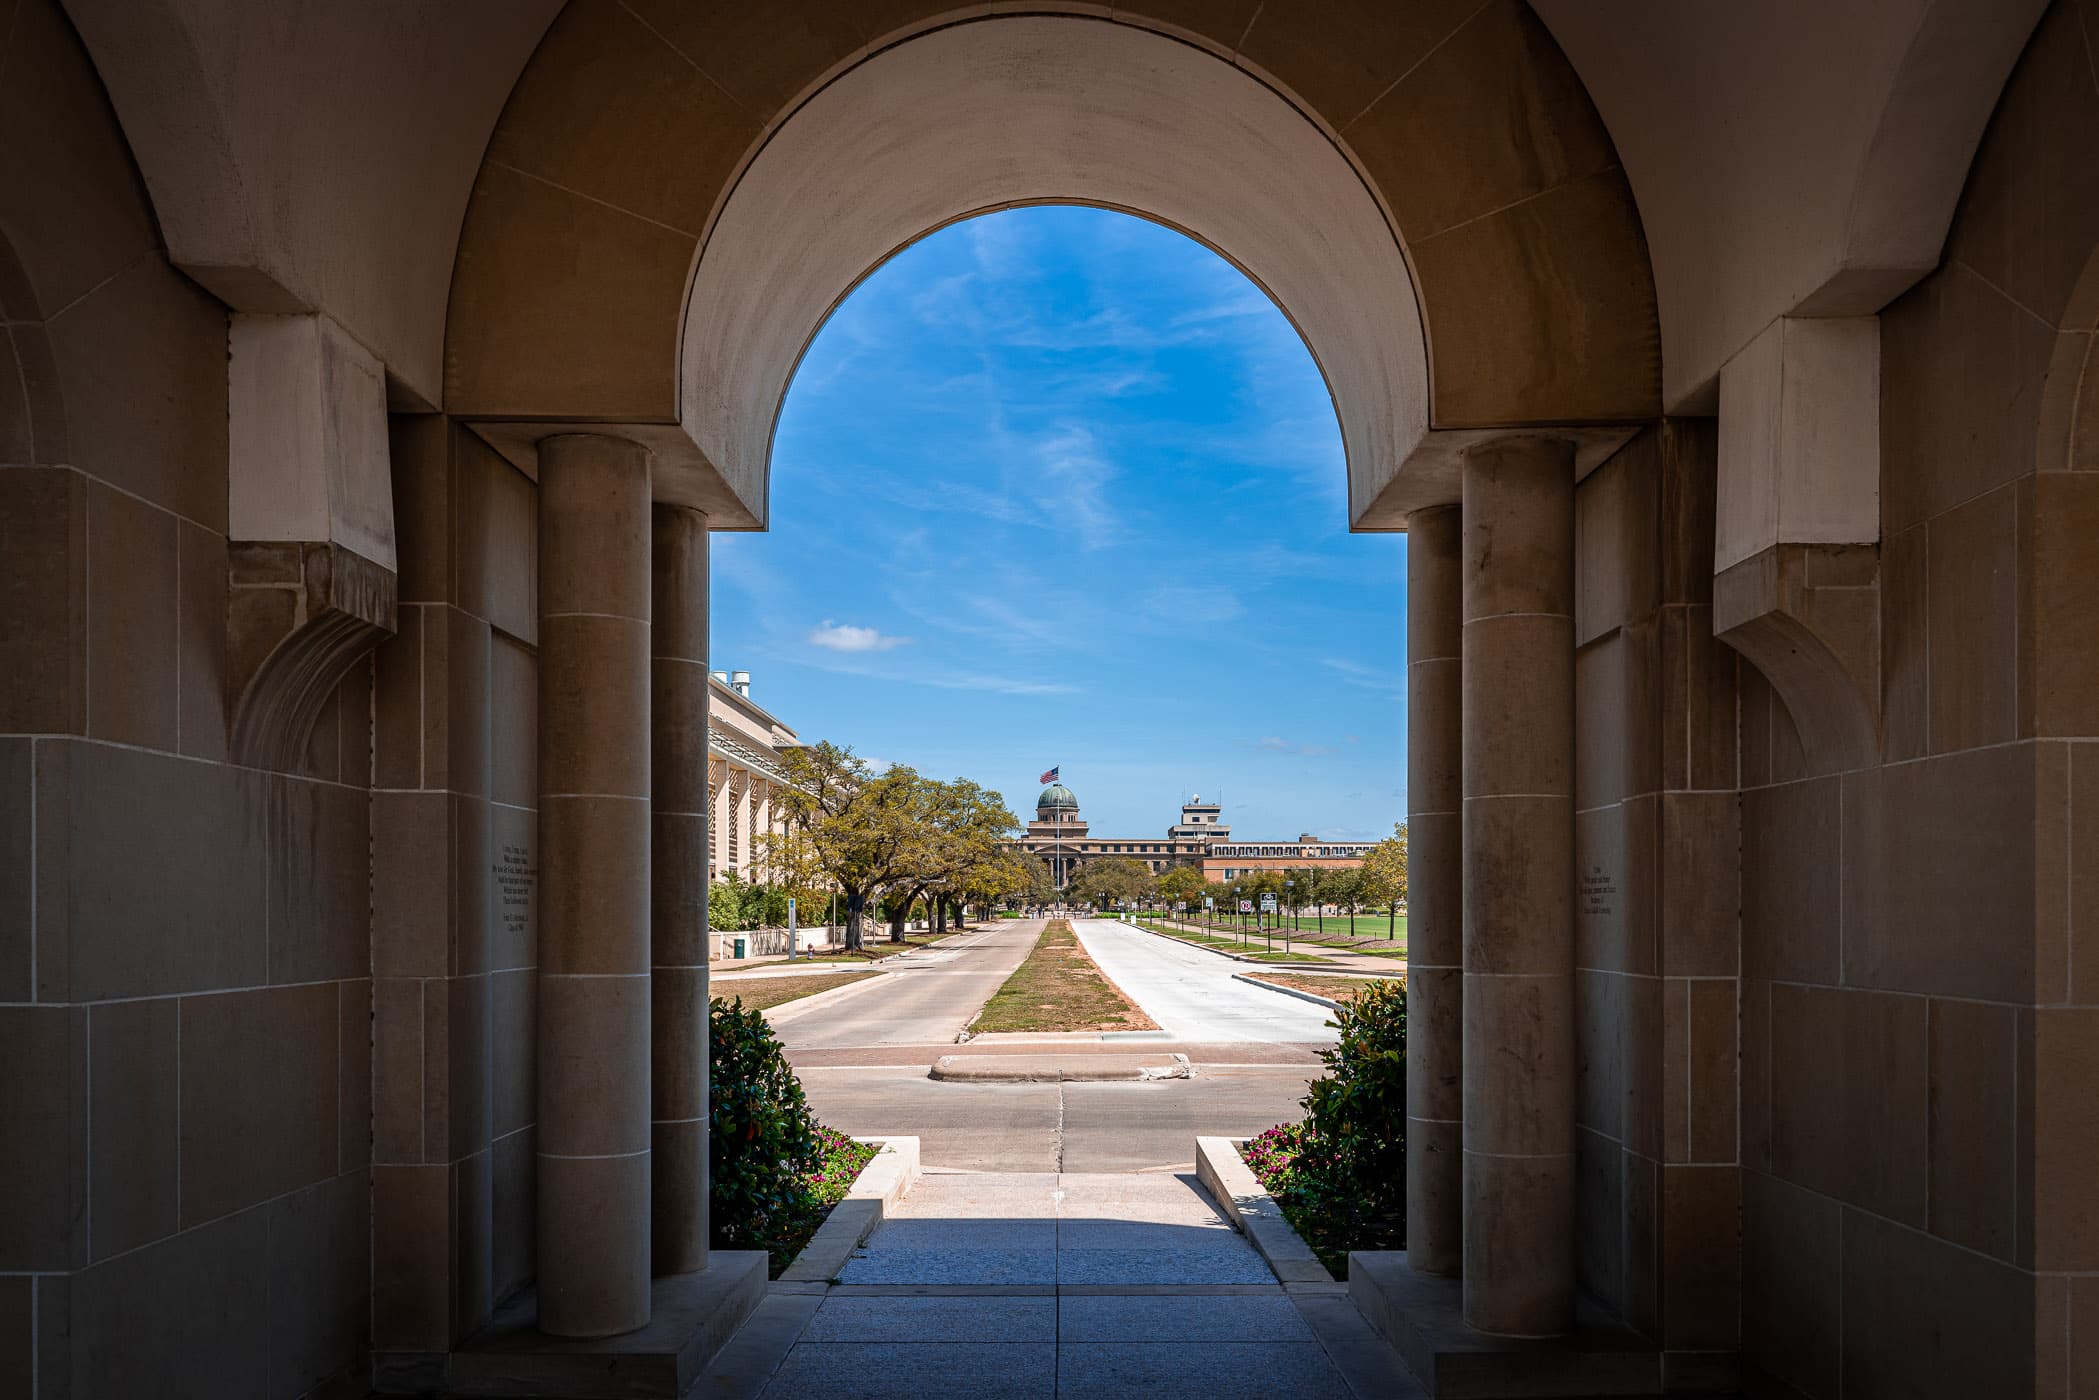 The Academic Building at Texas A&M University as seen from under Albritton Tower.